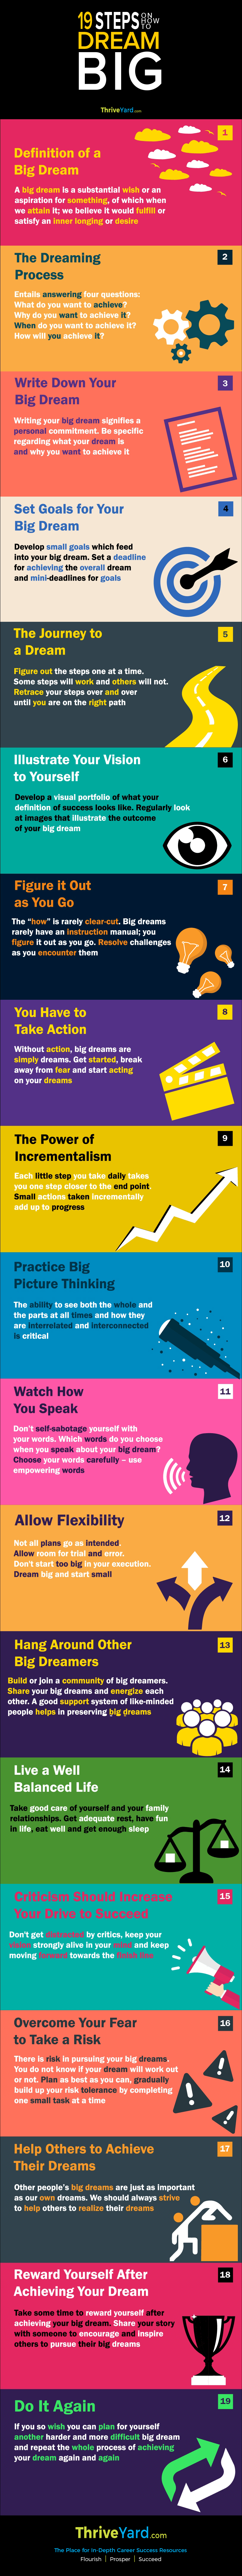 19 Steps on How to Dream Big - Infographic